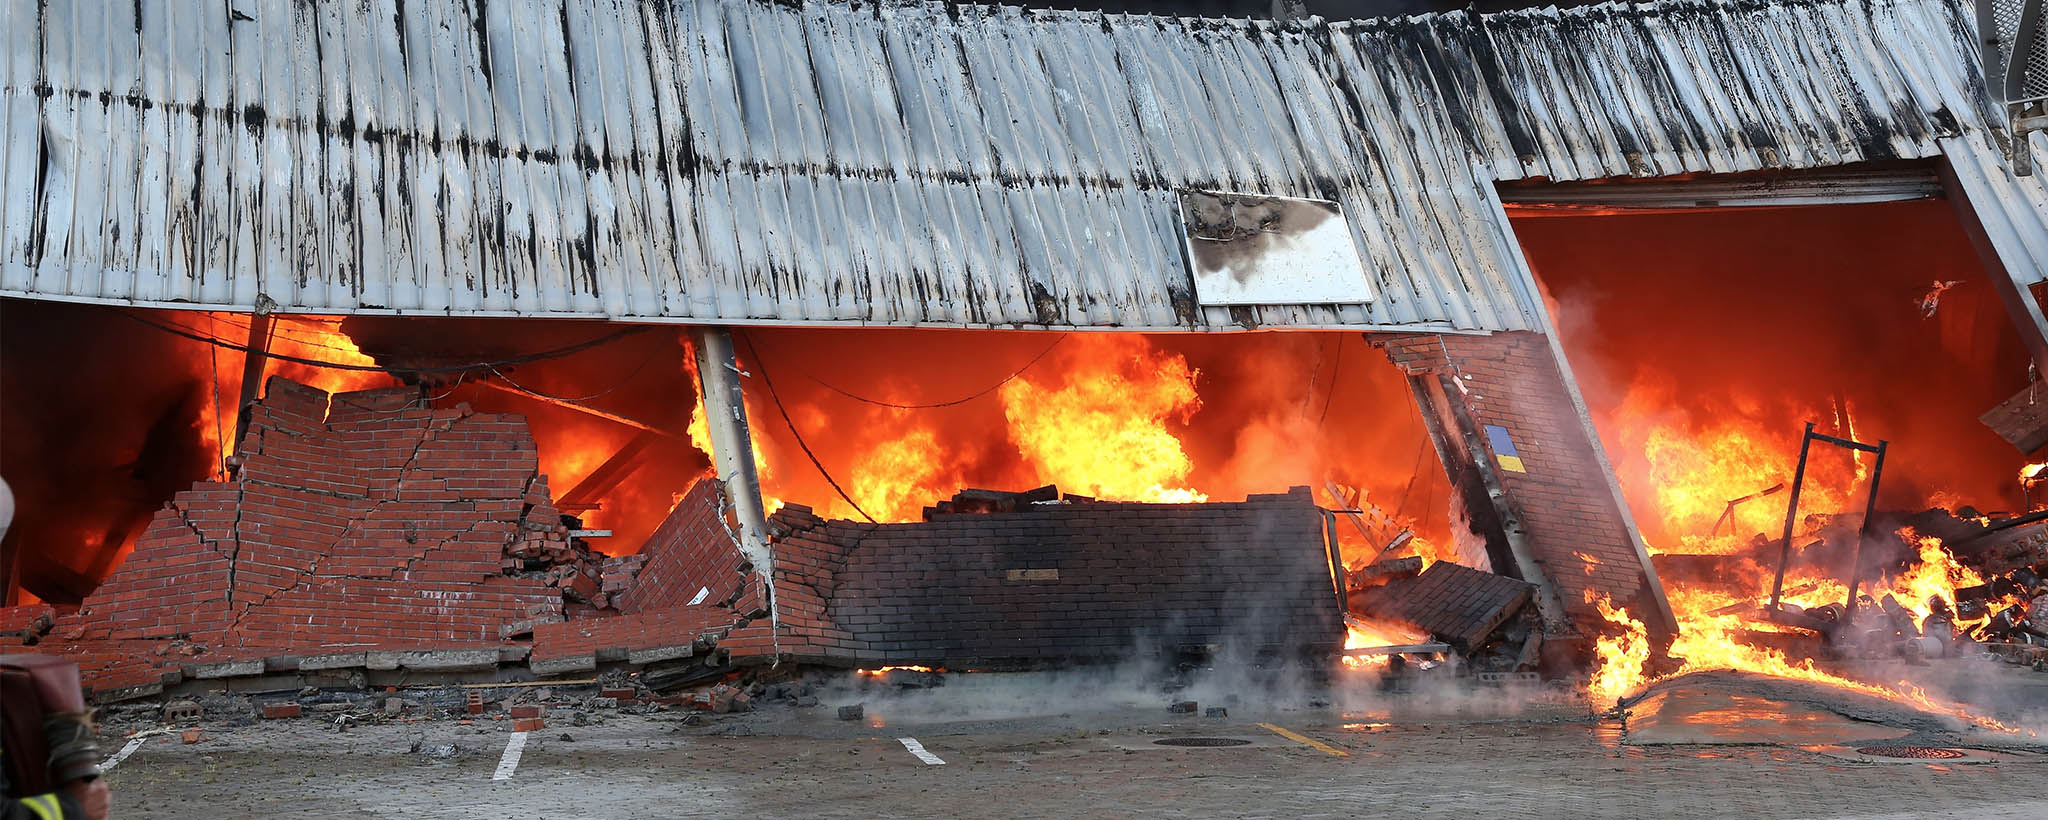 A fire inside of a building has caused the brick exterior and the ceiling to collapse